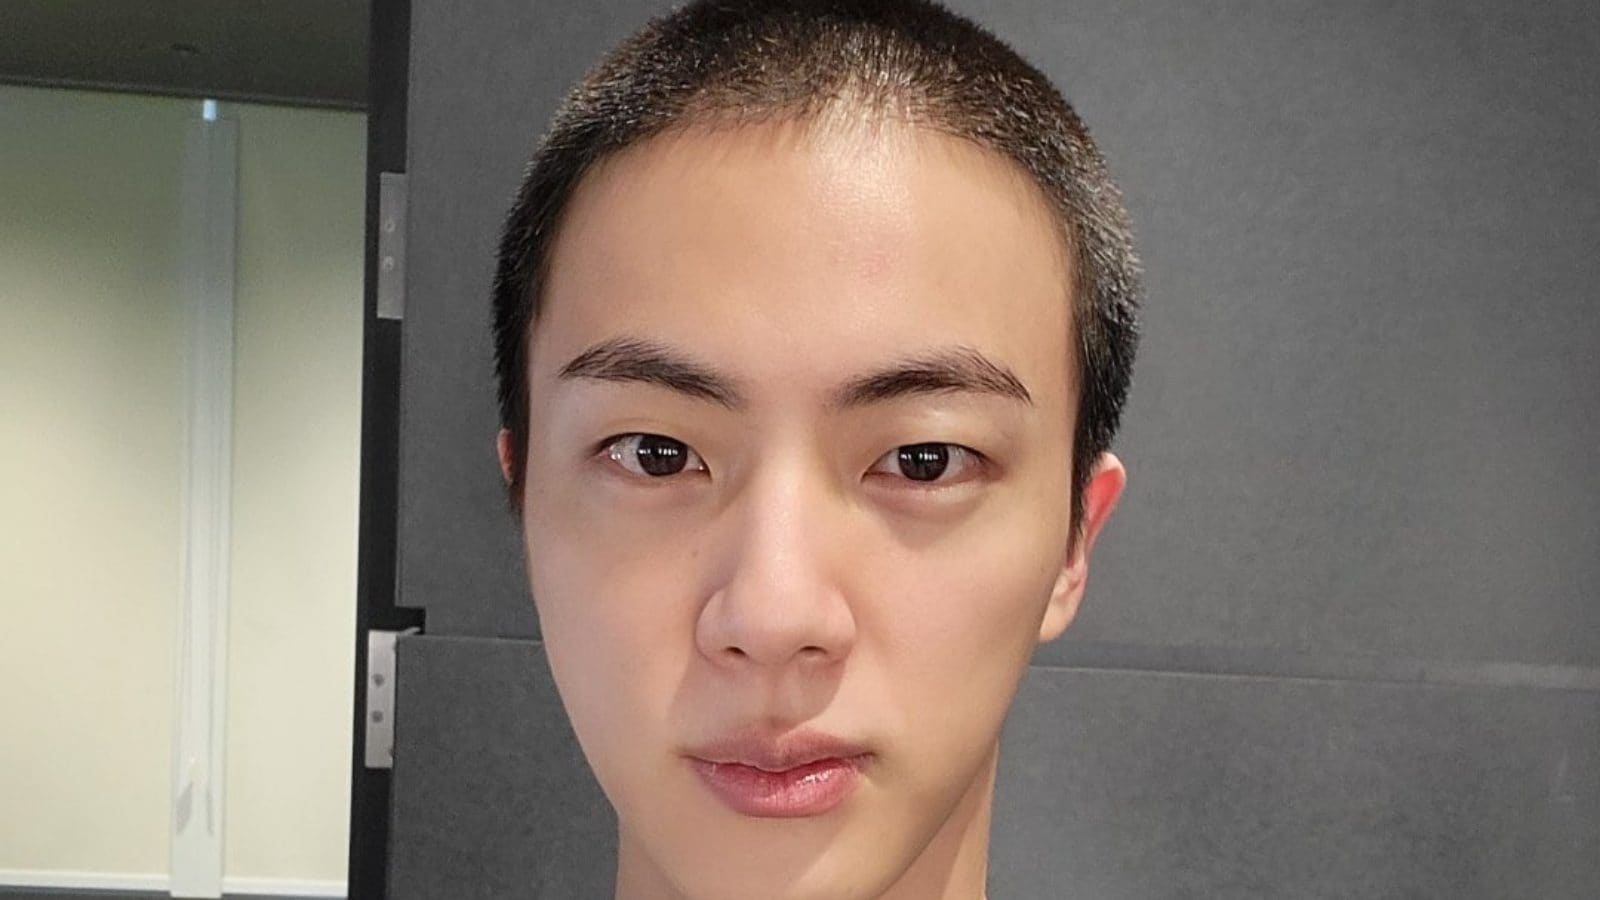 BTS' Jin Shares Photo of New Buzz Cut Ahead of Military Service